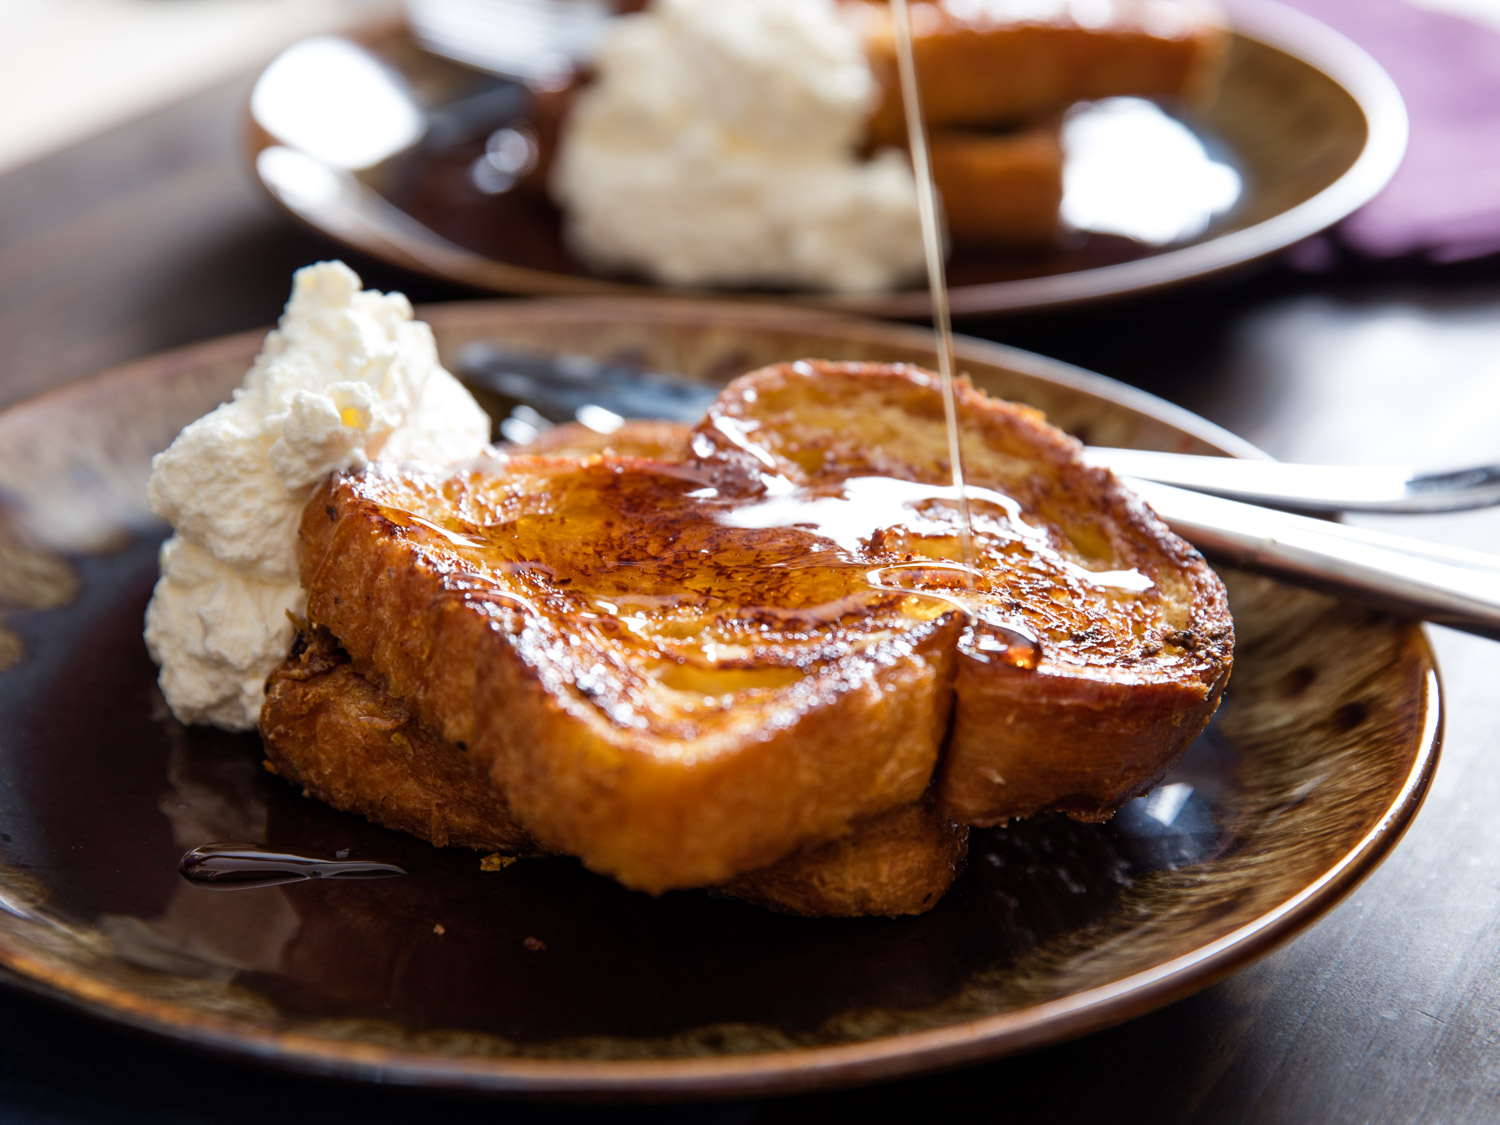 Thick, tender, custardy slices of challah or brioche, perfectly browned and flavored with orange zest, rum, and a trio of spices. This is special-occasion French toast.